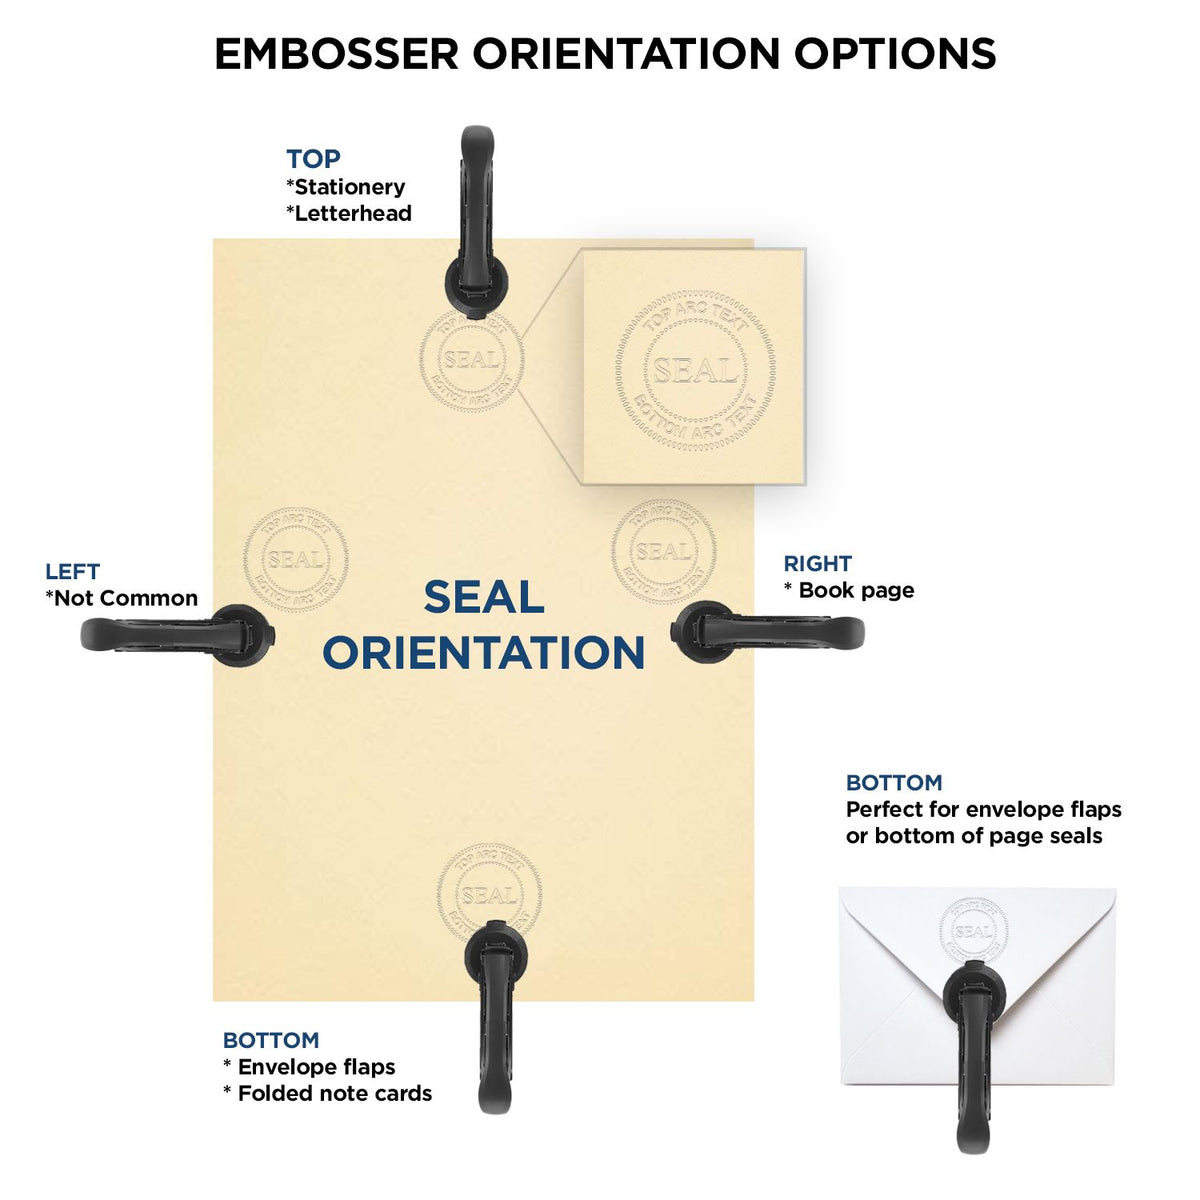 An infographic for the Heavy Duty Cast Iron South Carolina Engineer Seal Embosser showing embosser orientation, this is showing examples of a top, bottom, right and left insert.